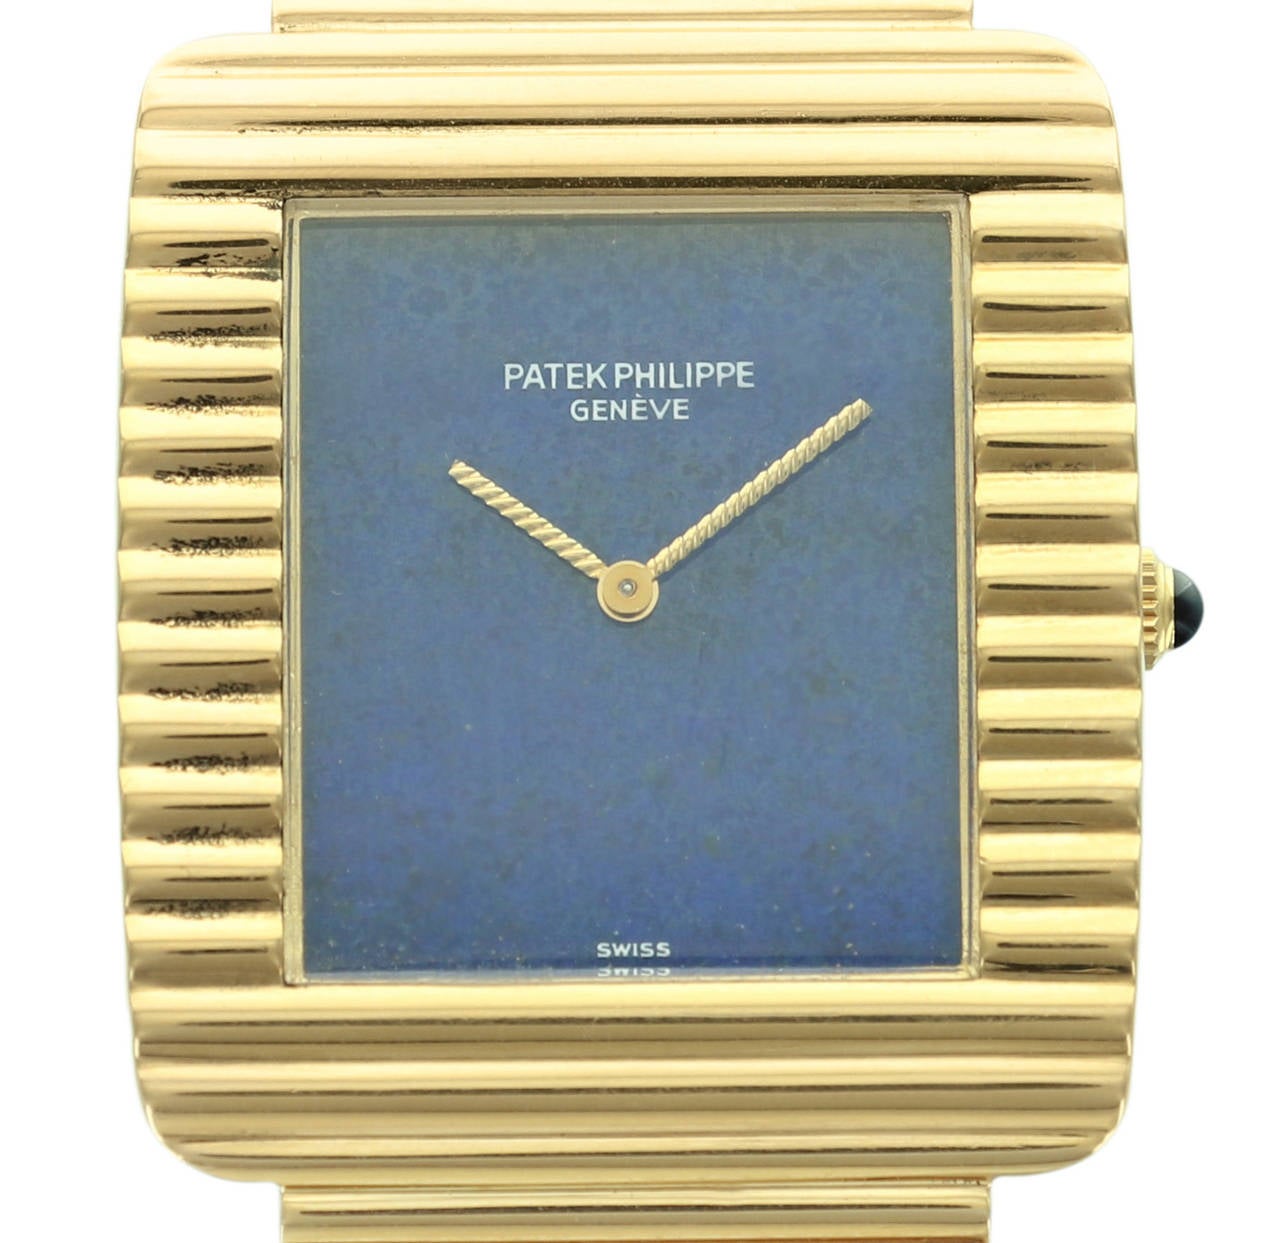 This rare Patek Philippe rectangle shaped watch is an unusual yellow gold watch with a beautiful Lapis Lazuli dial.